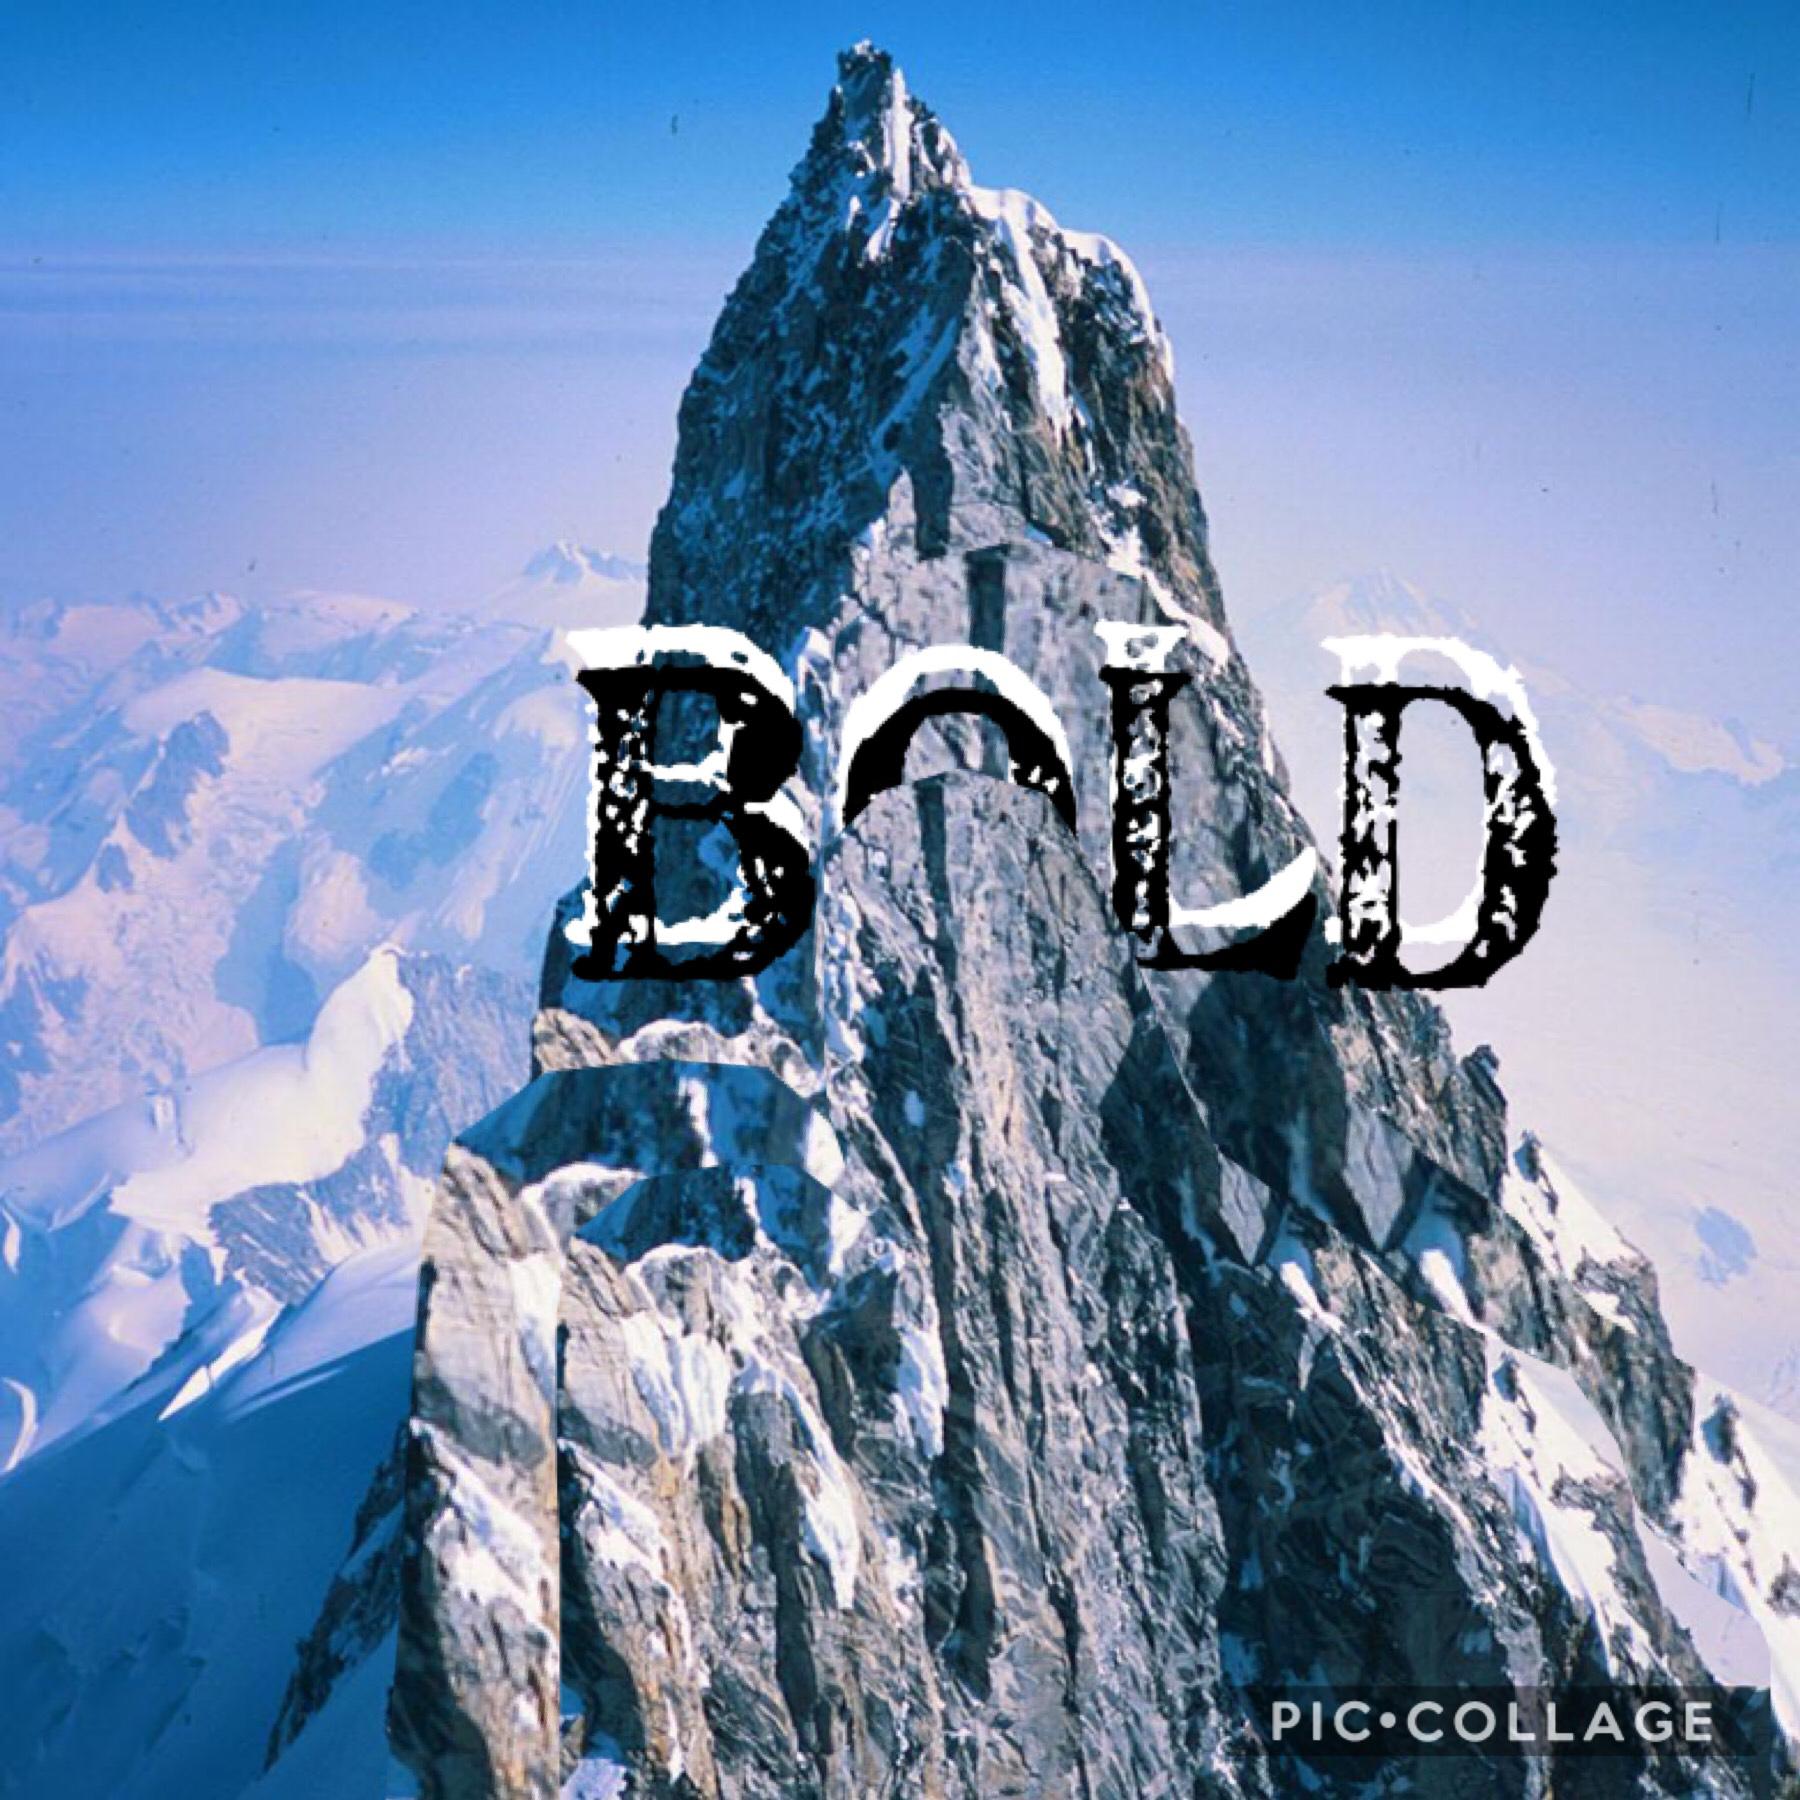 I accieently got the word bold stuck in the mountain 🏔 😂😂